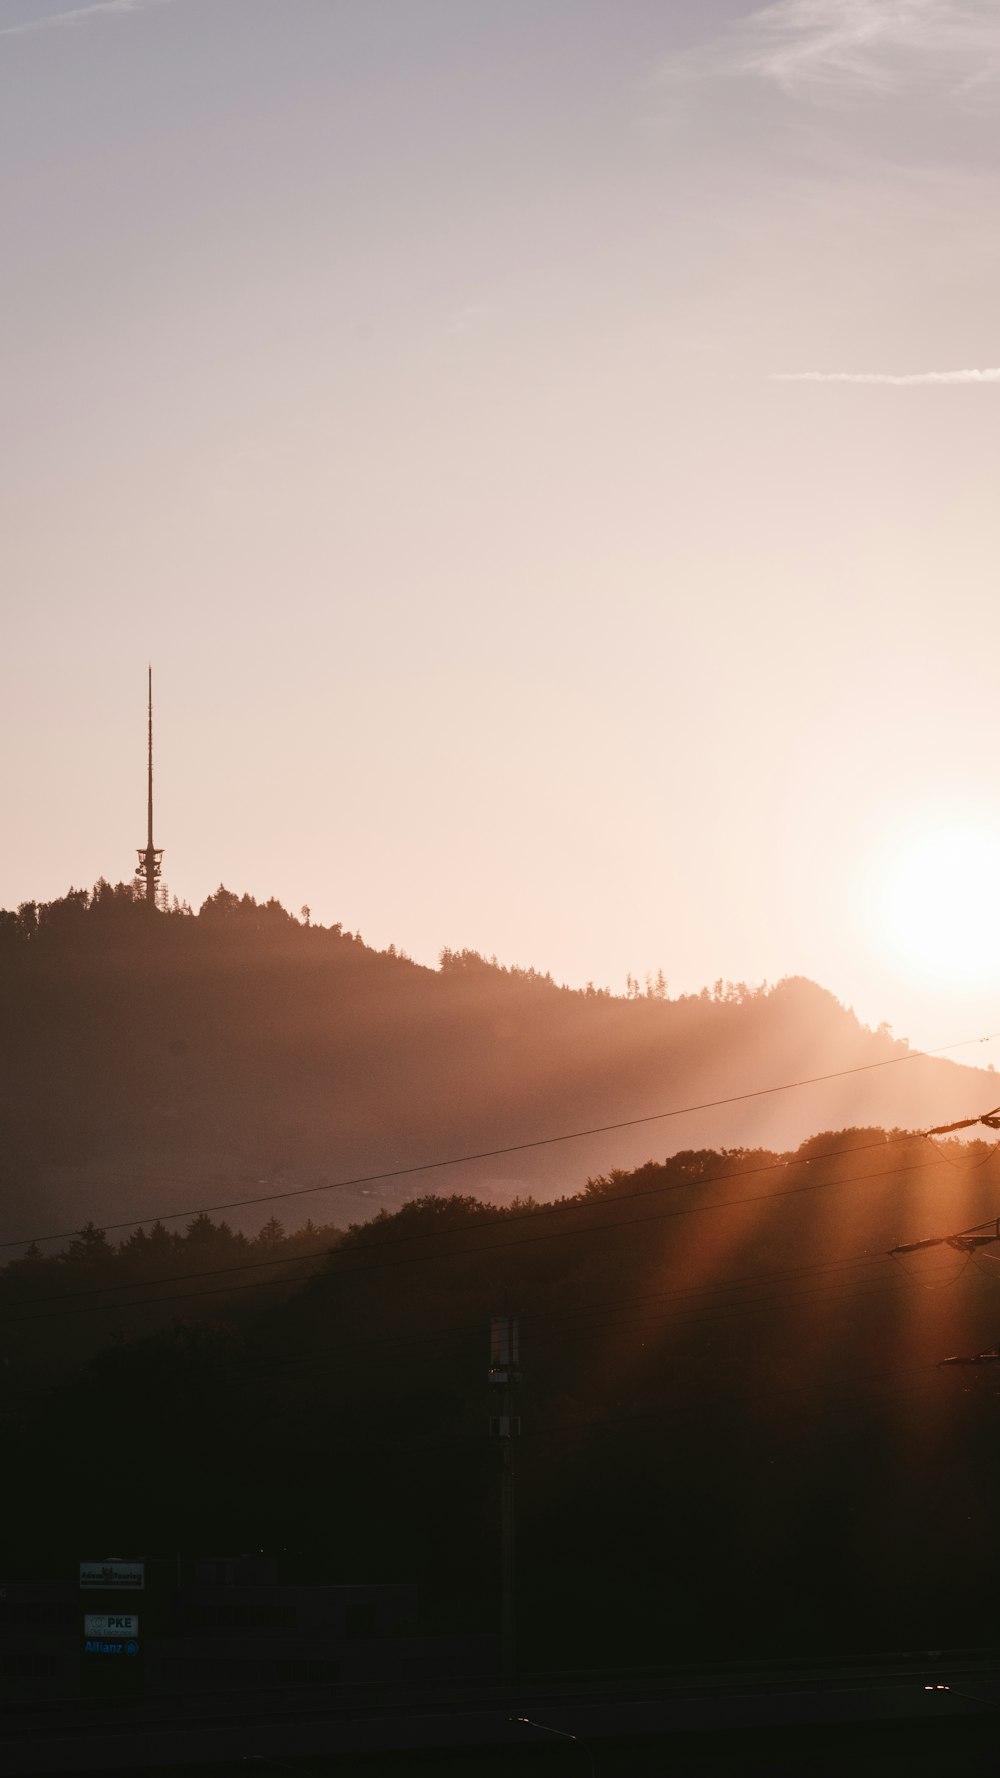 the sun is setting over a hill with a radio tower in the distance